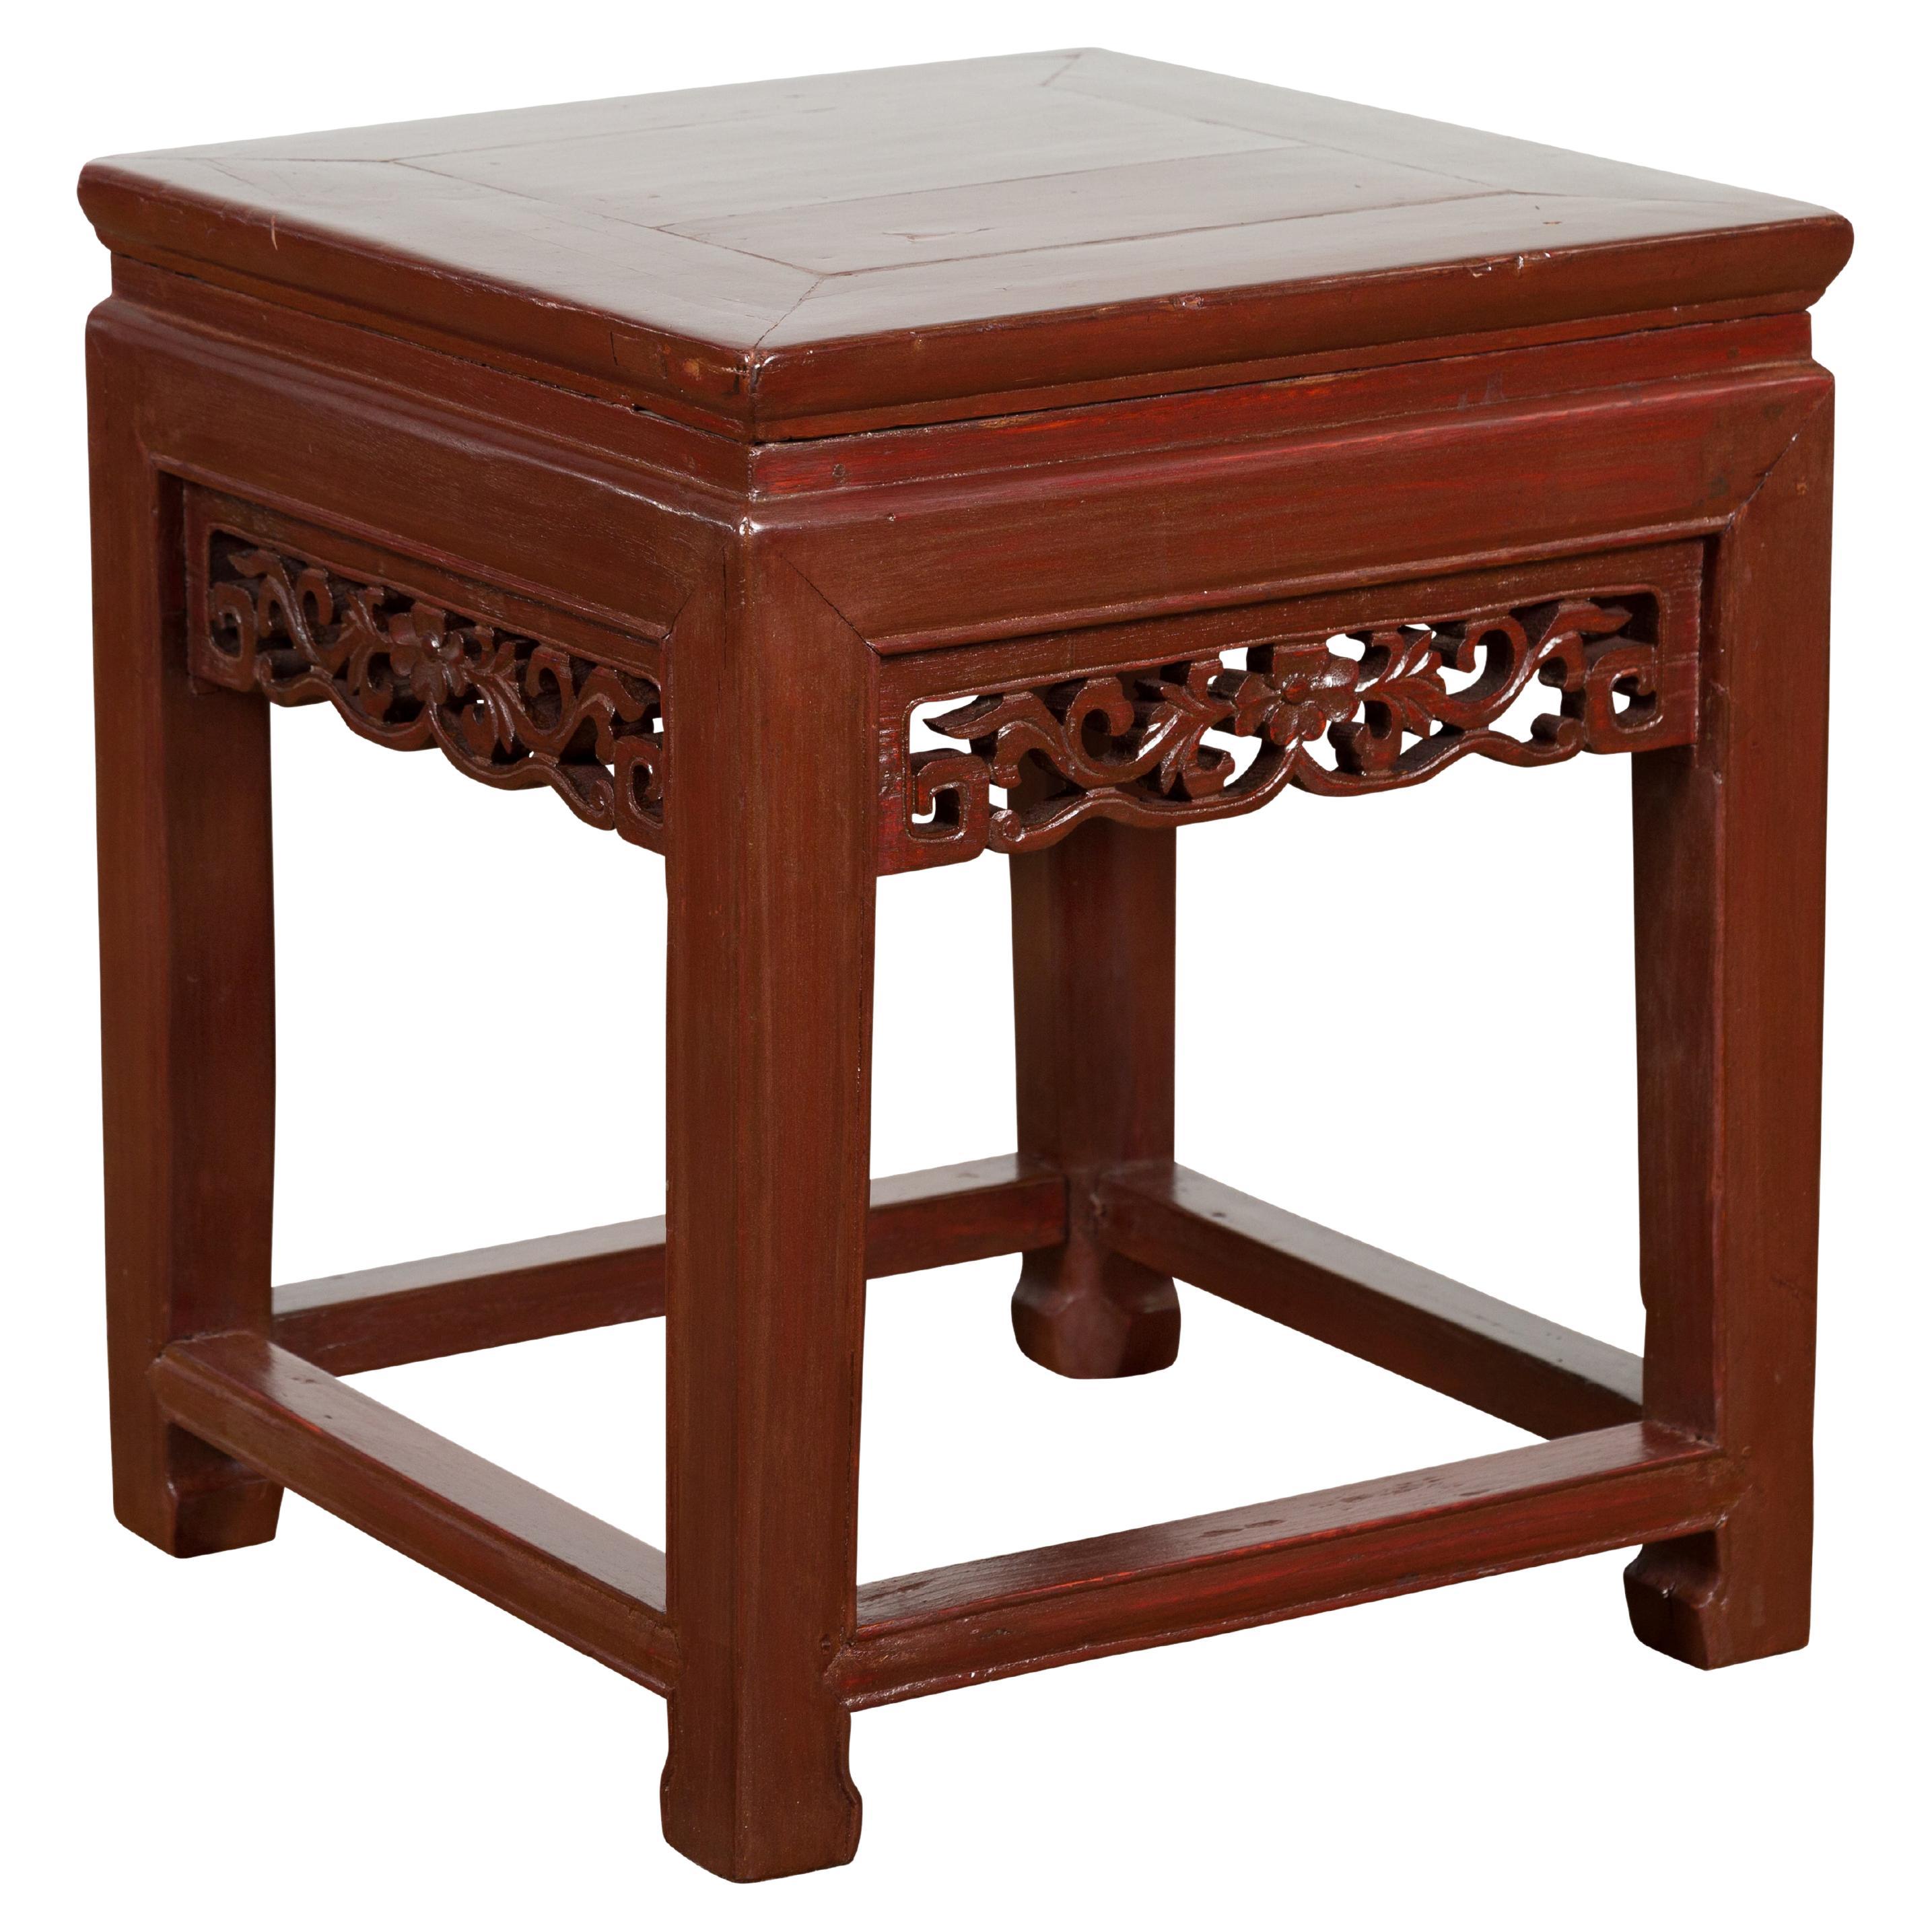 Chinese Late Qing Dynasty Period Red Lacquer Carved Side Table or Stool For Sale